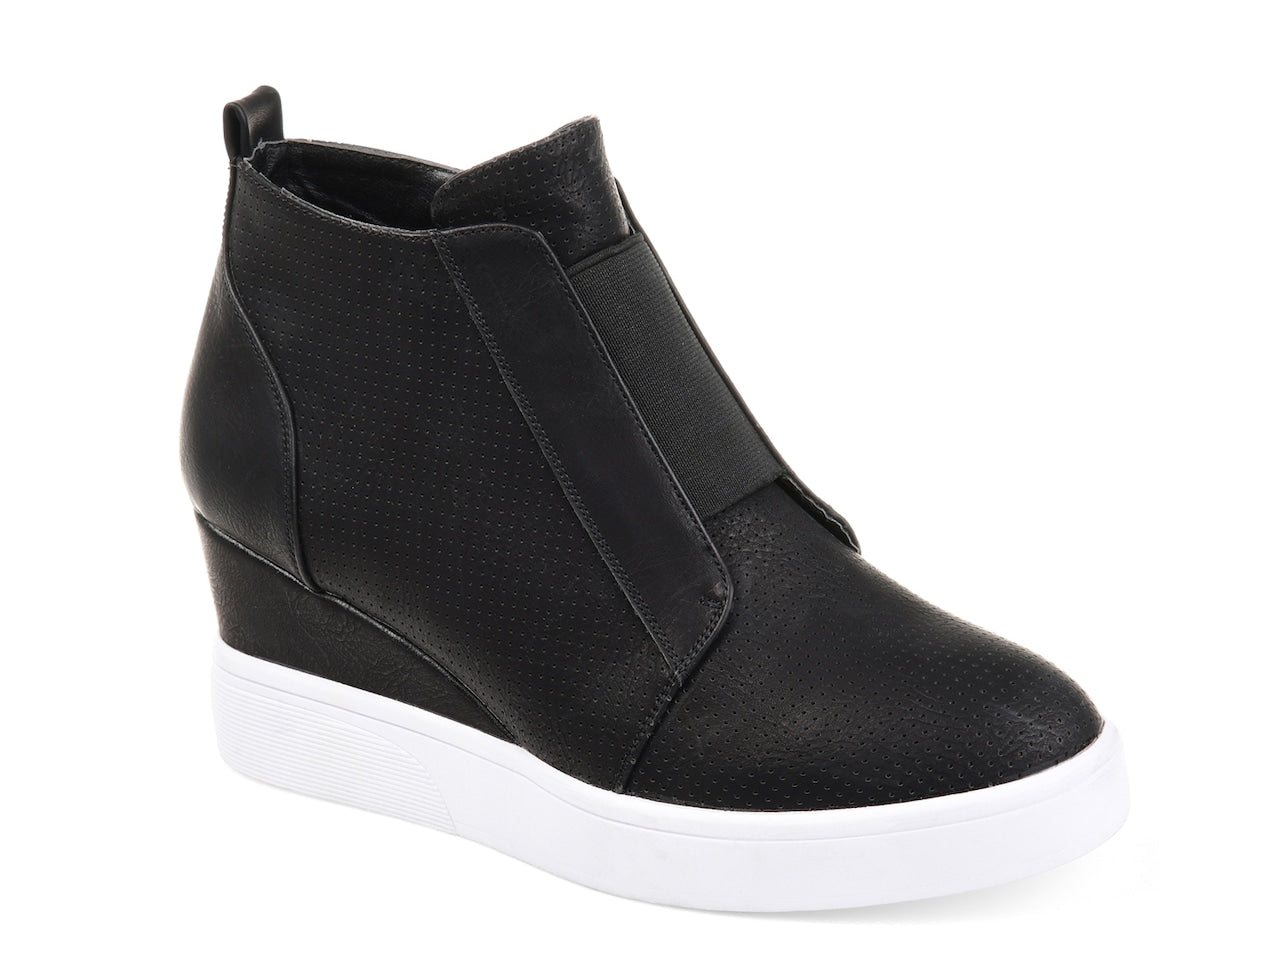 Mia Shoes Christie Wedge Ankle Boots